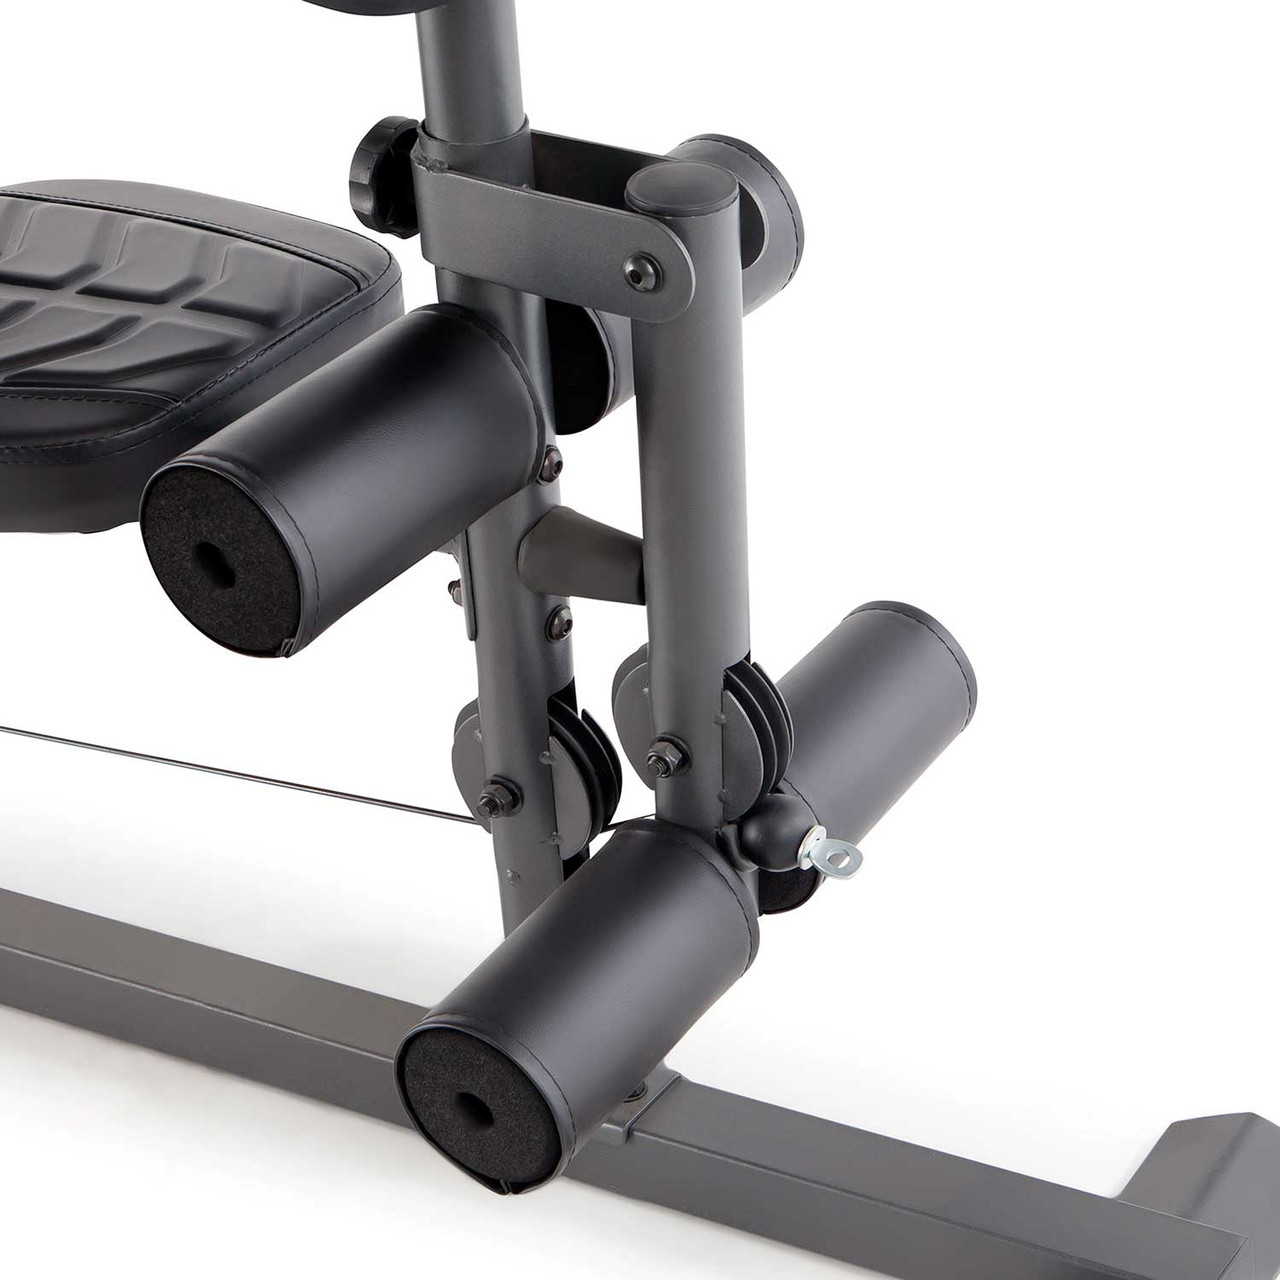 The Marcy 150 Lb. Stack Home Gym Mwm 1005 Includes A Leg Developer To Deliver A Full Body Workout 27590